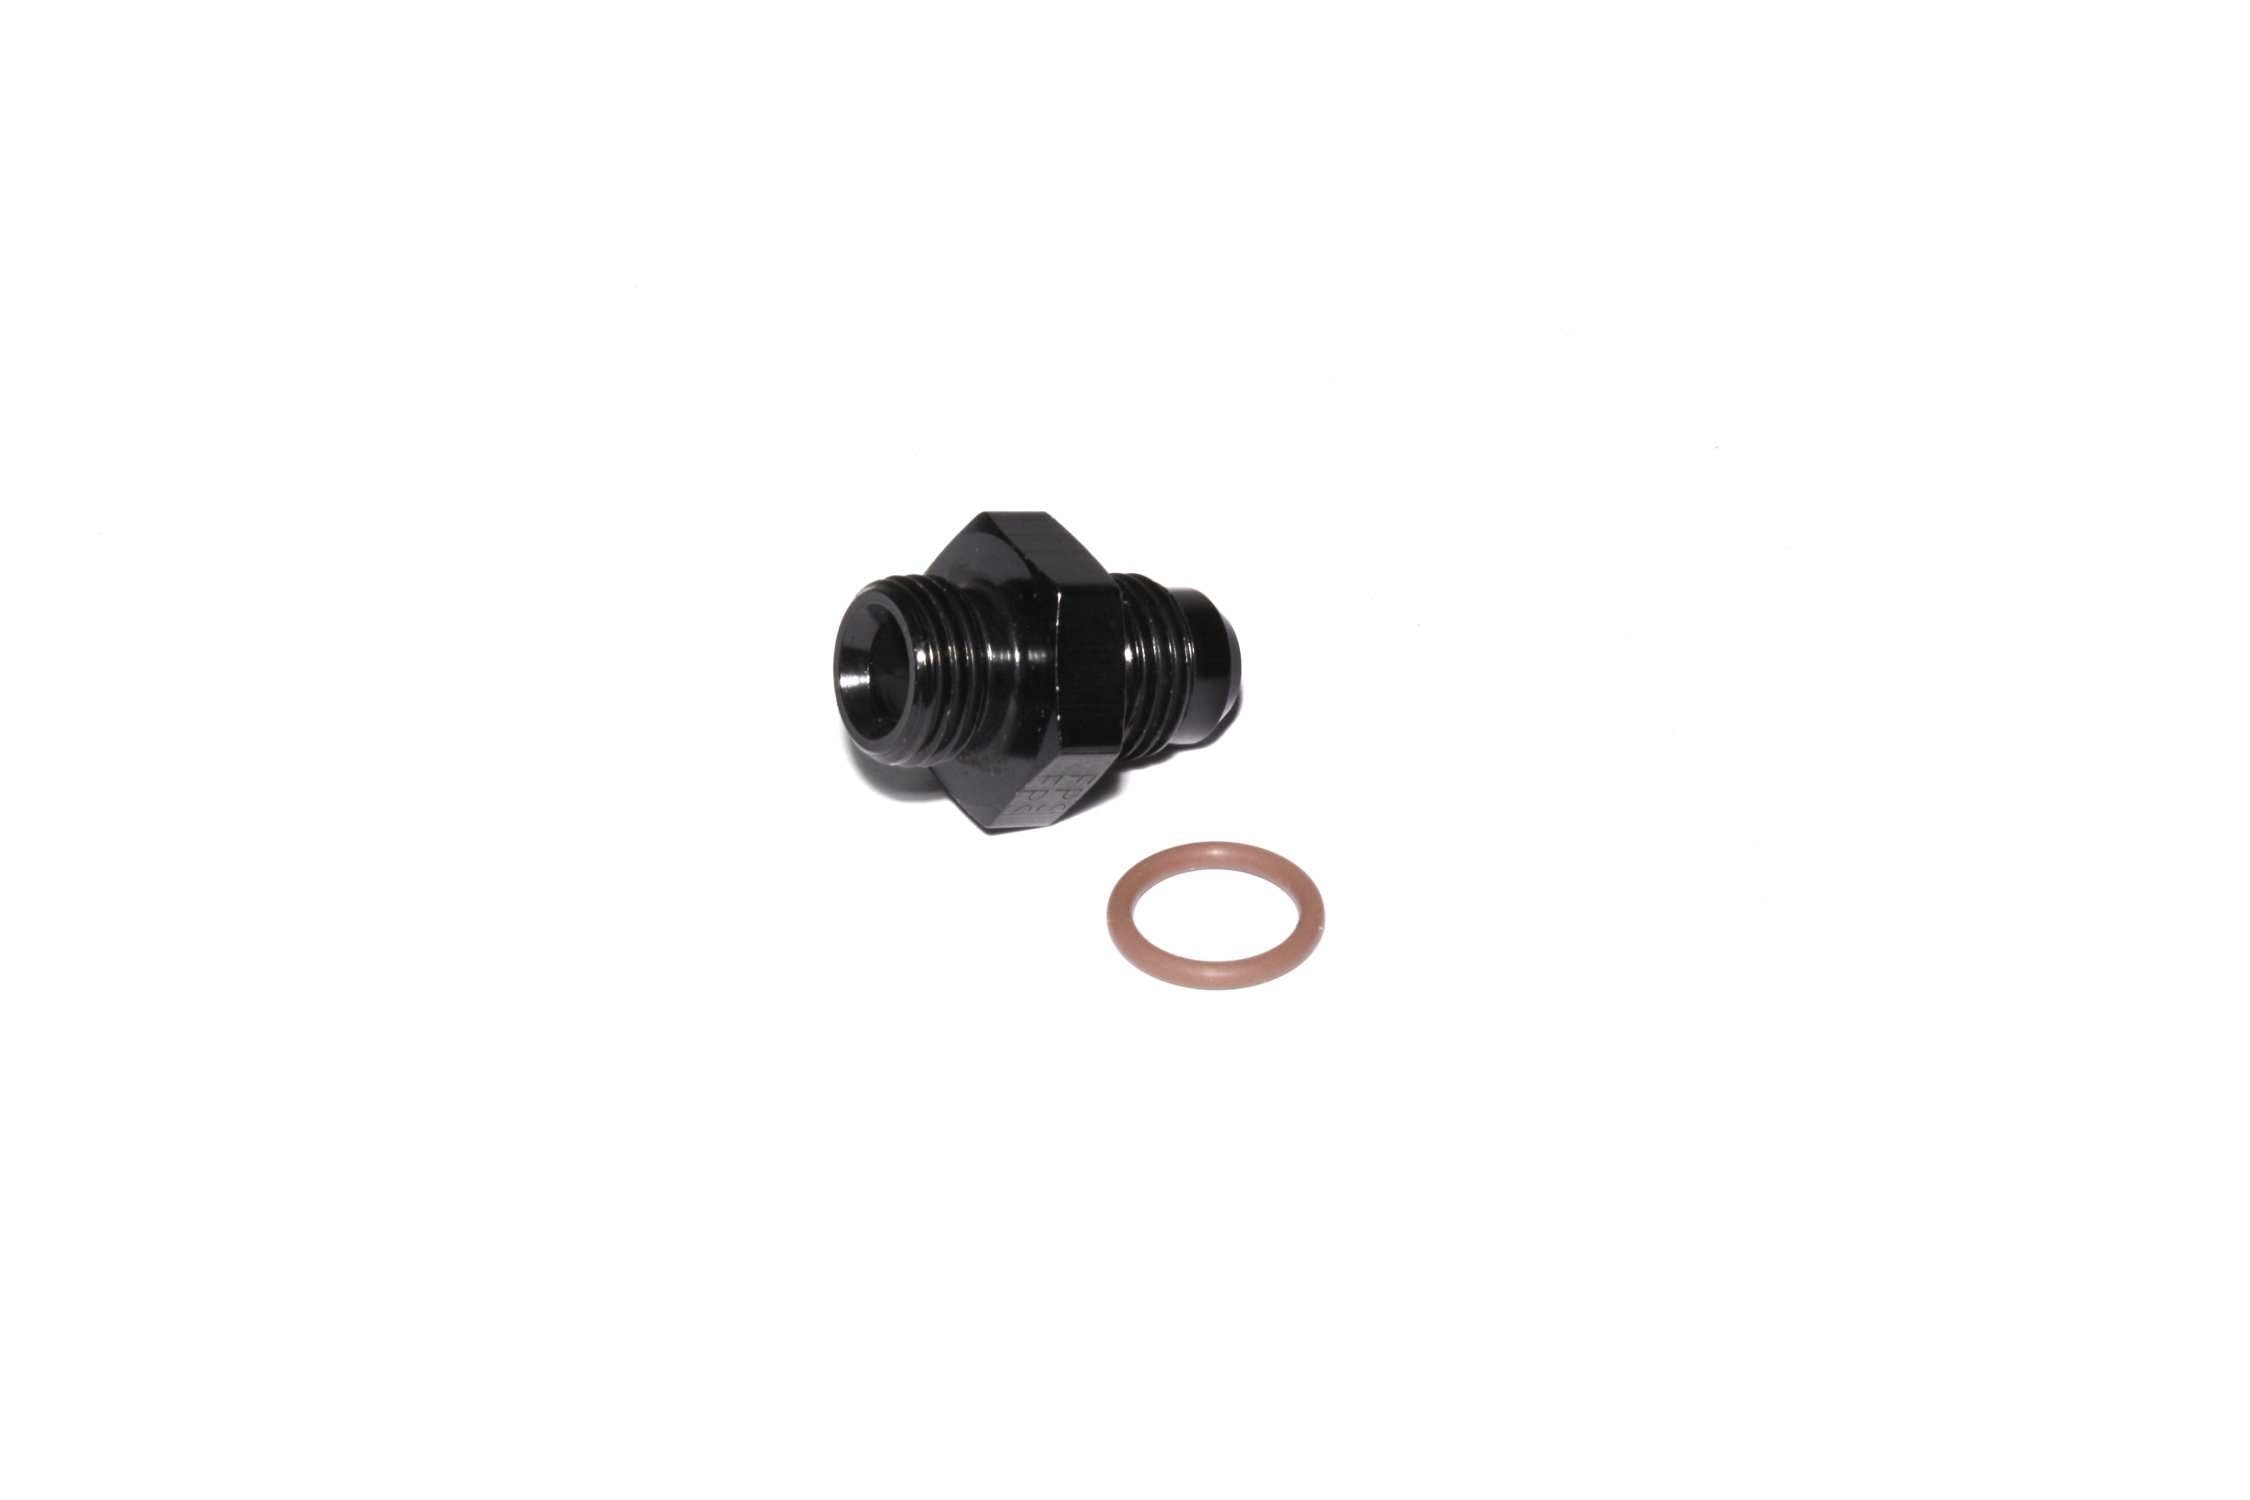 FAST - Fuel Air Spark Technology 30251-1 -6AN SAE O-Ring to -6AN